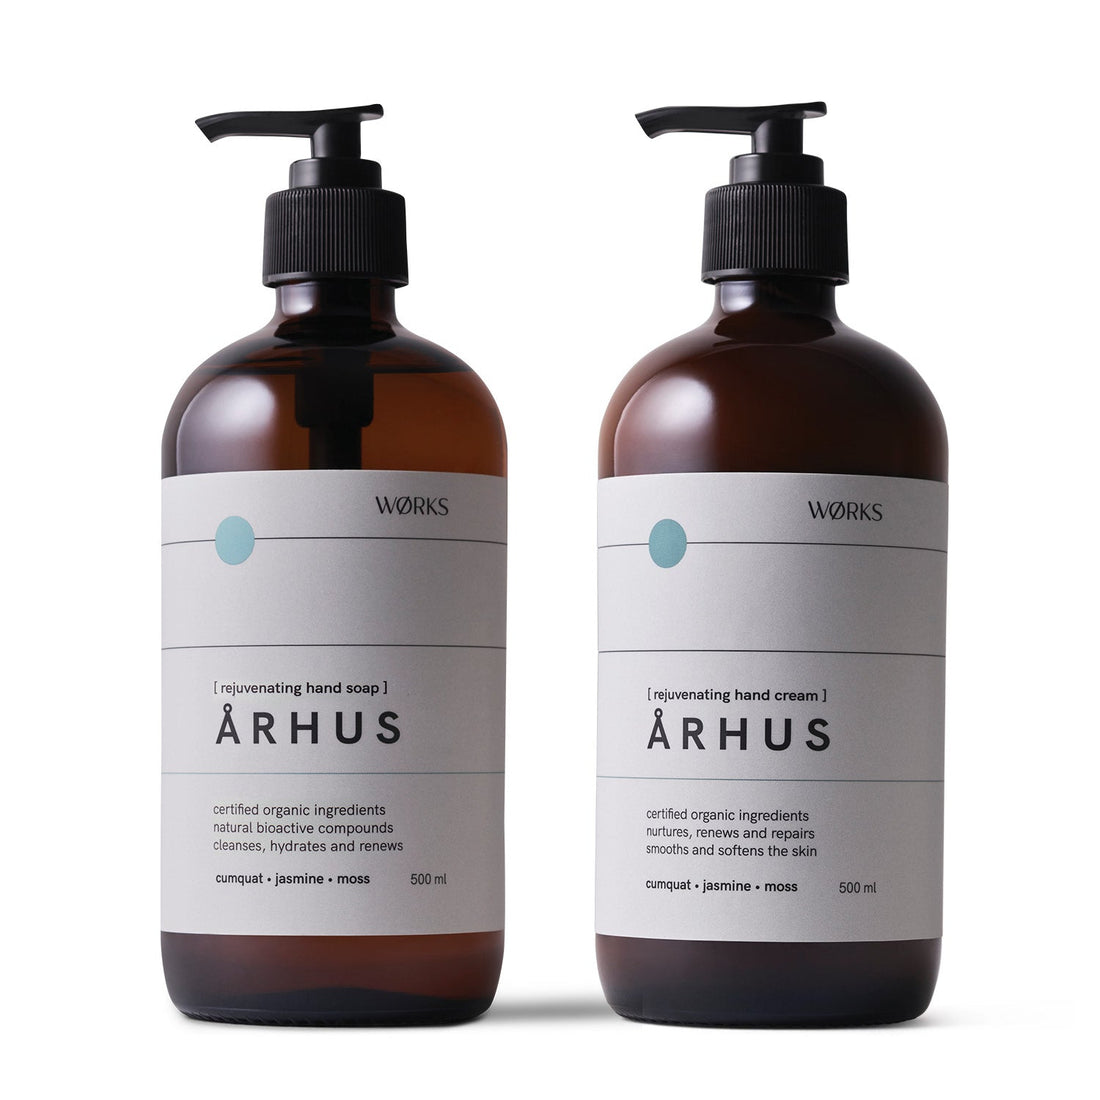 Hand cream and soap duo by WØRKS